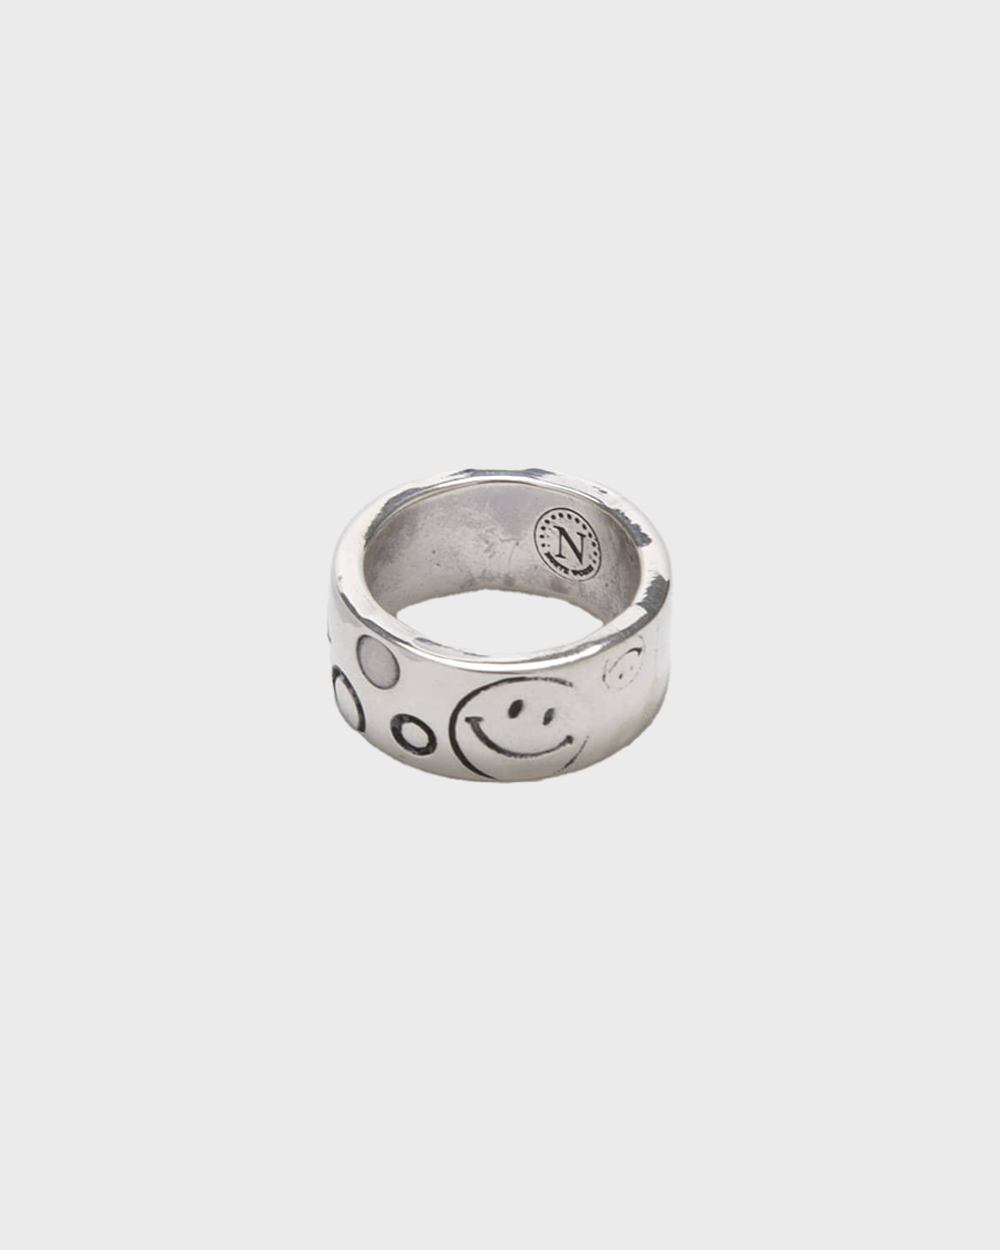 900 Silver Stamp Ring (W-321a)